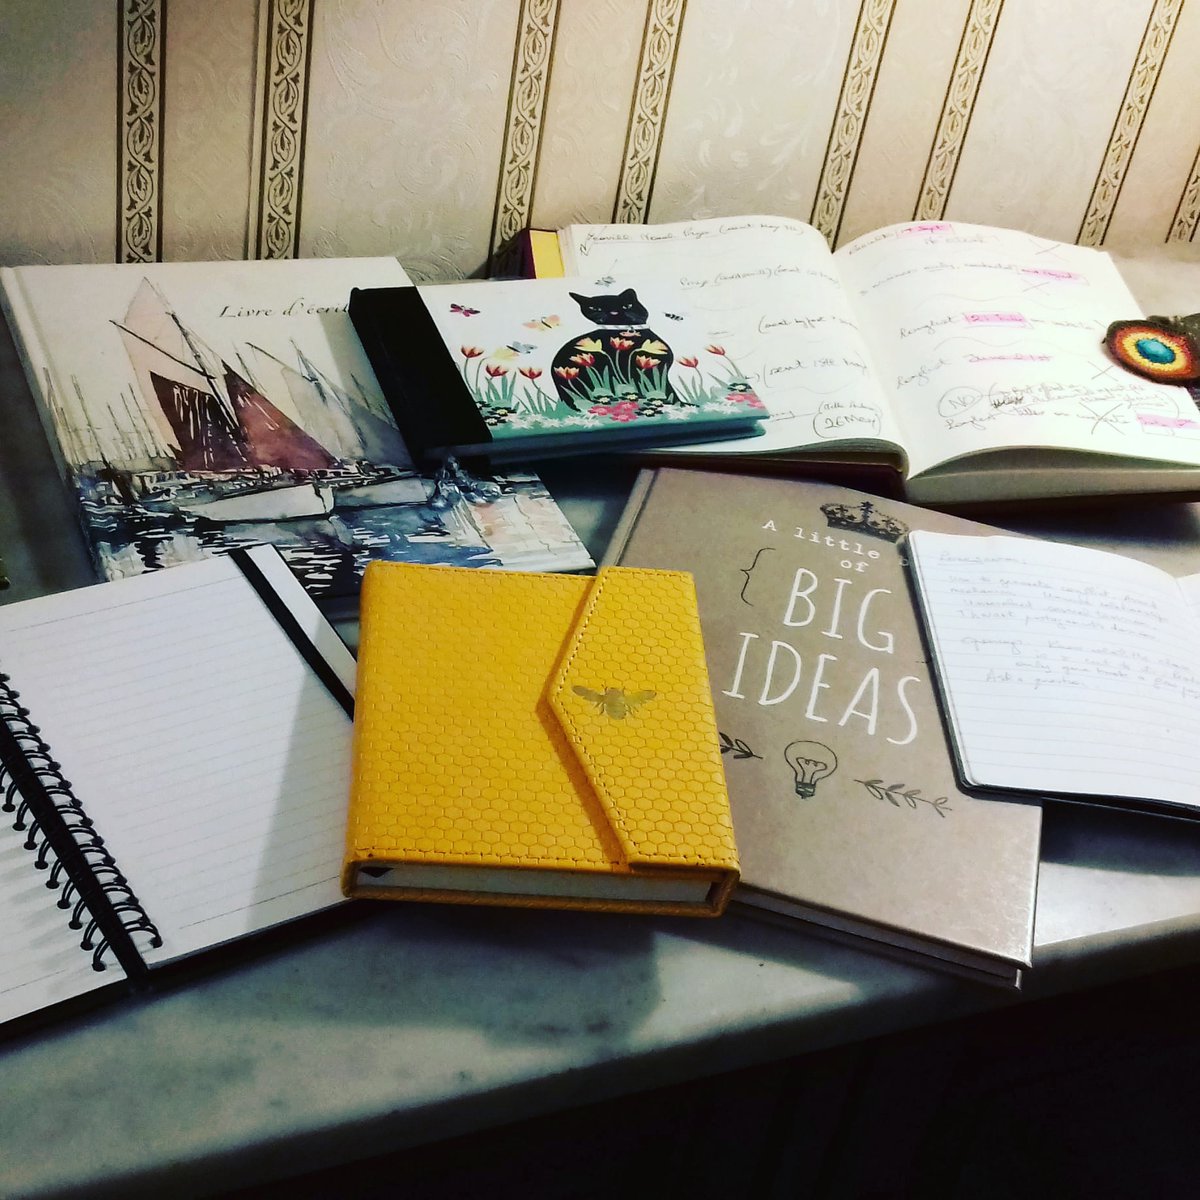 Writing notebooks. We all need them. The more the better...
#writingtips #booksbooksbooks #notebooks #writing